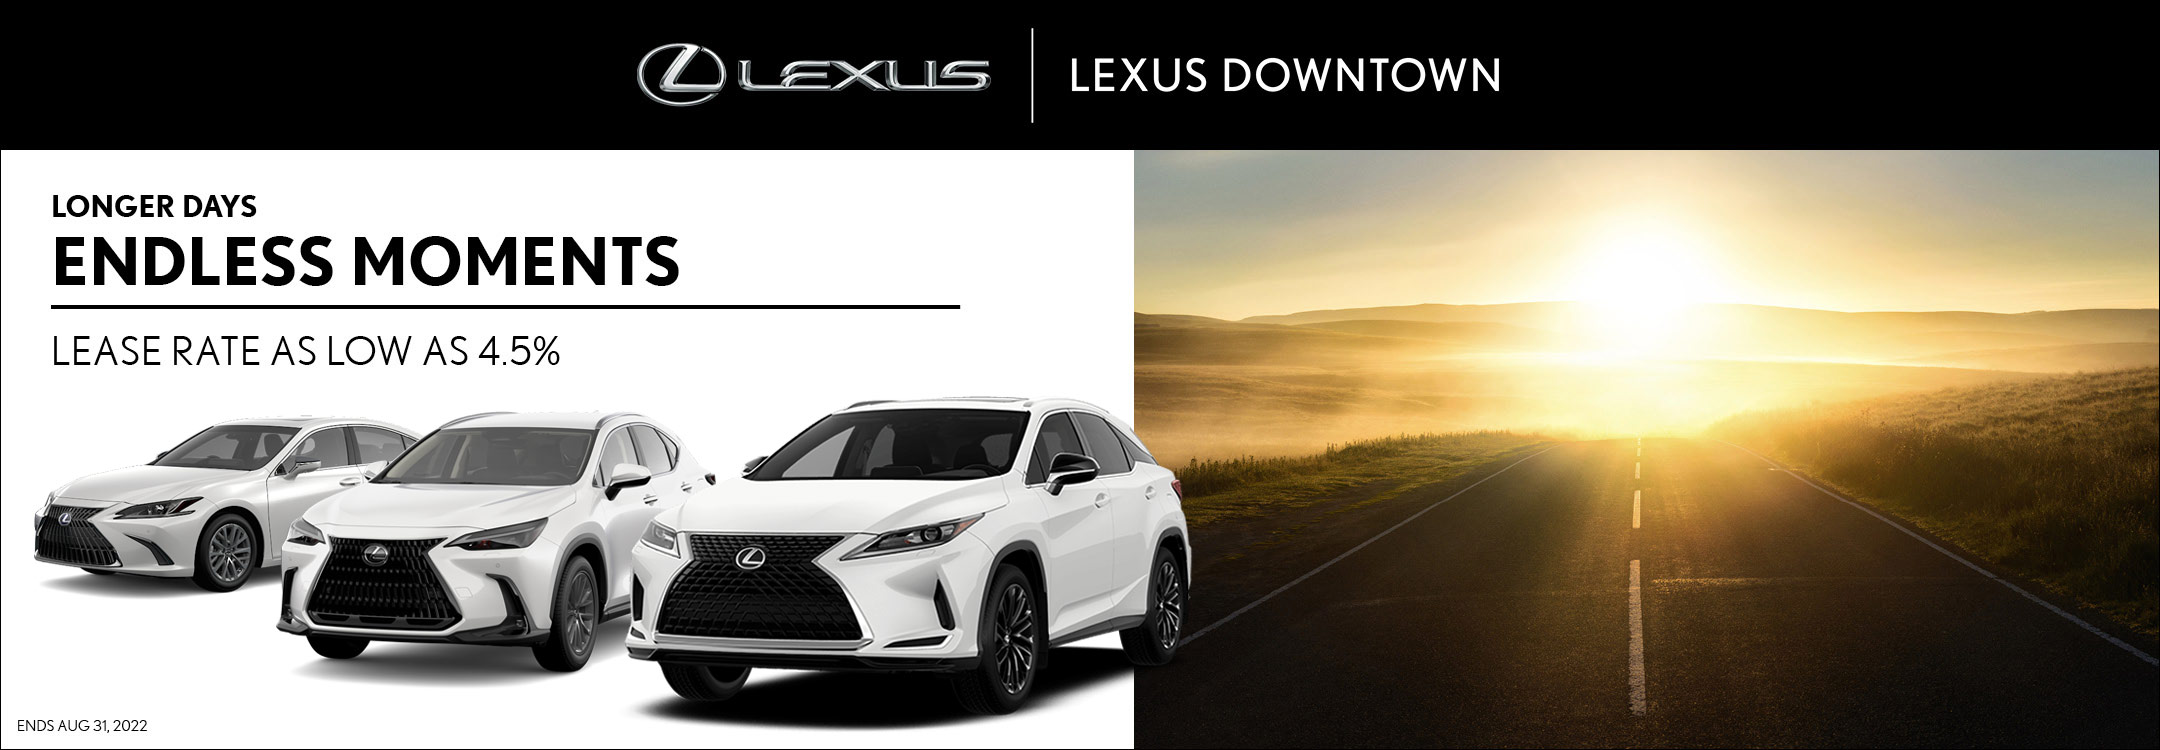 2022 Finance Offers at Lexus Downtown